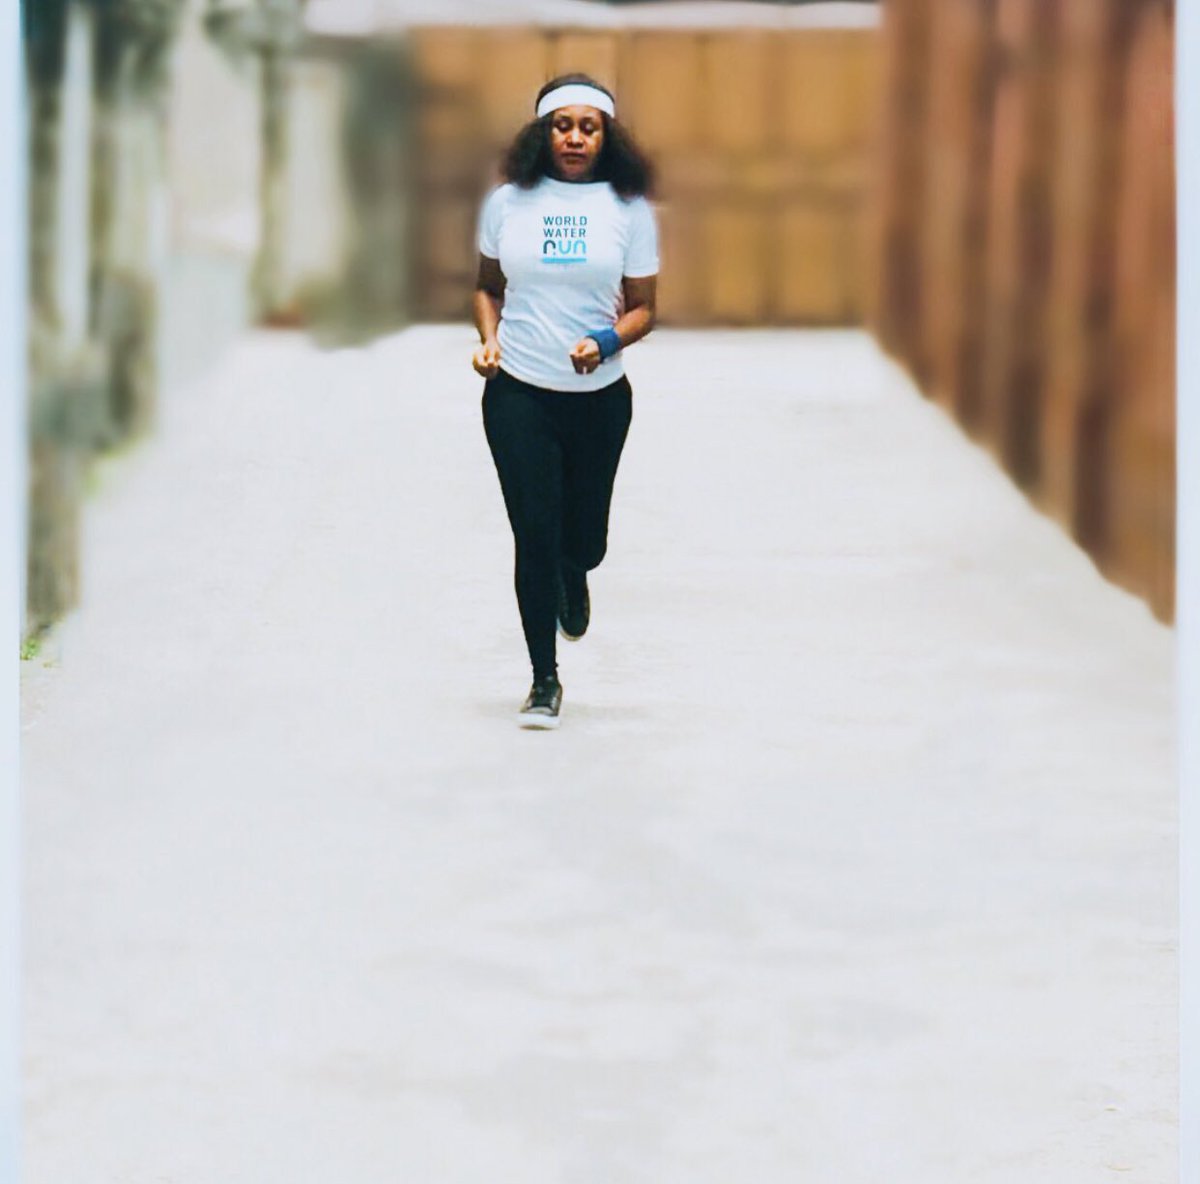 Just hit the street for DAY 1️⃣ of the #WorldWaterRun week in anticipation of #UNWaterConference.

We are committed to doing something to solve our global water crisis.

#Thirst #Runblue #unwater #watercrisis #talkloveafricafoundation #WASH #wateraction #watercrisis